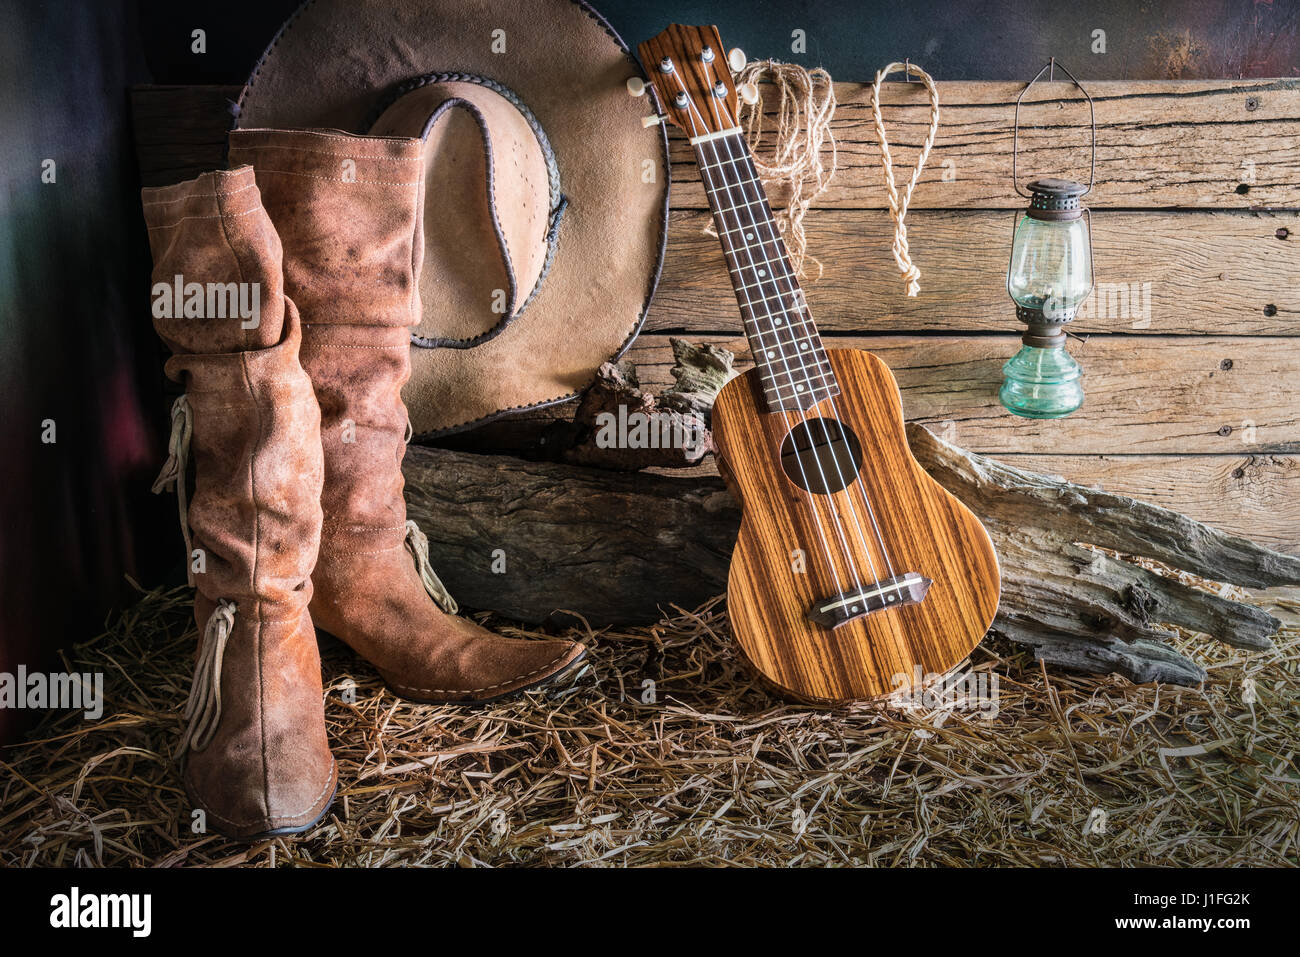 Slik Sway det er smukt Still life painting photography with ukulele on american west rodeo brown  felt cowboy hat and traditional leather boots in vintage ranch barn  backgrou Stock Photo - Alamy